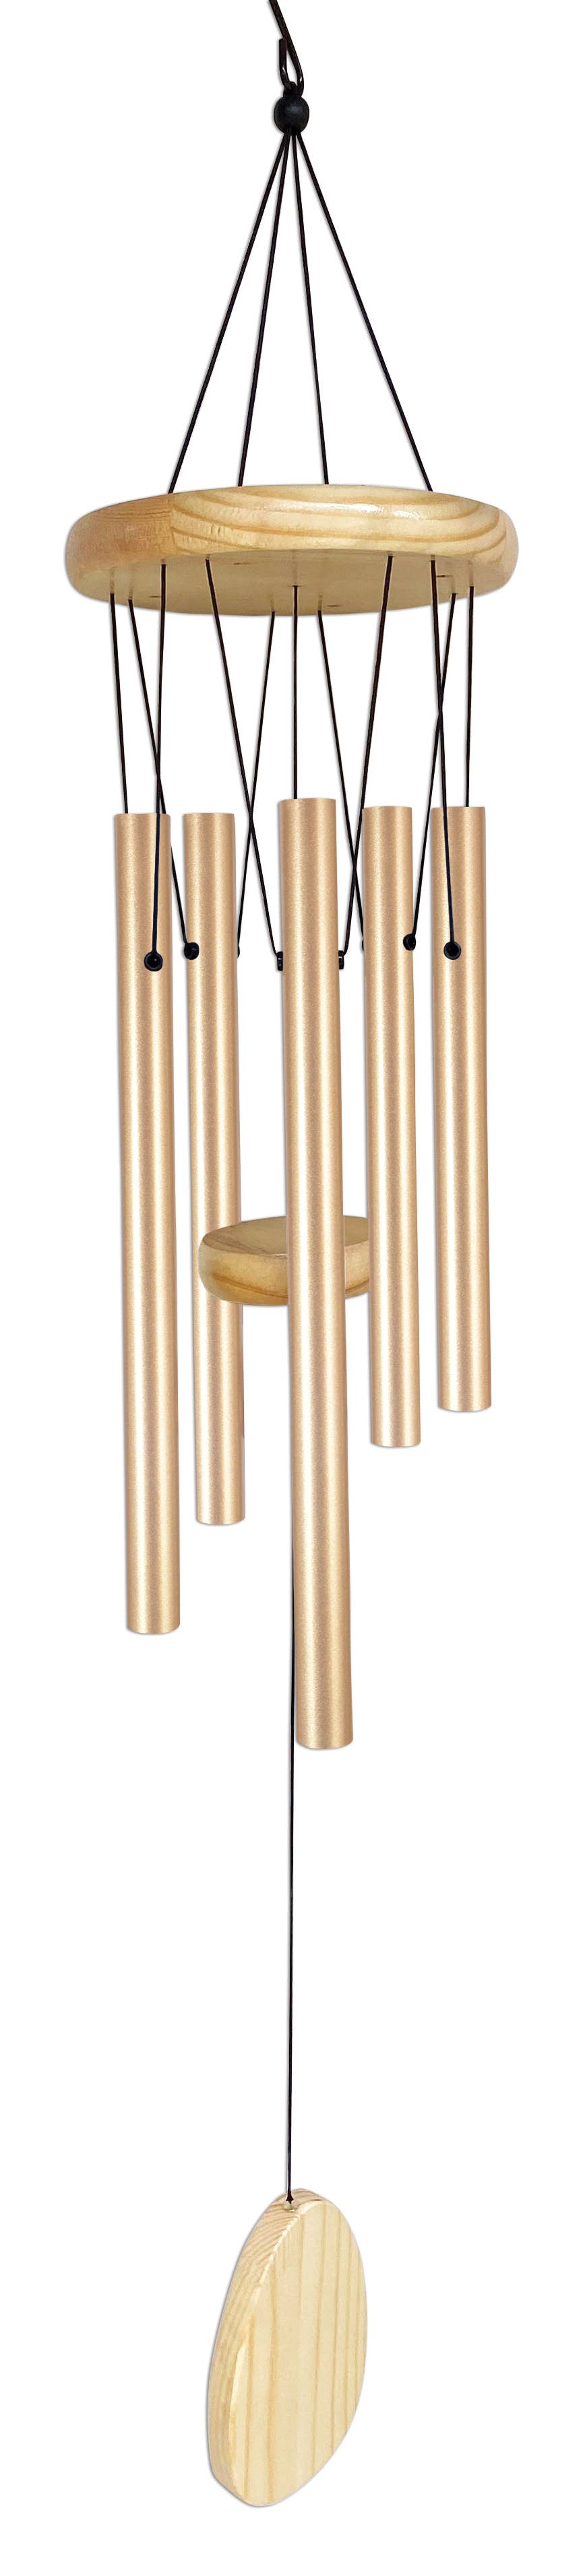 30" Light Wood with GoldTubes Chime